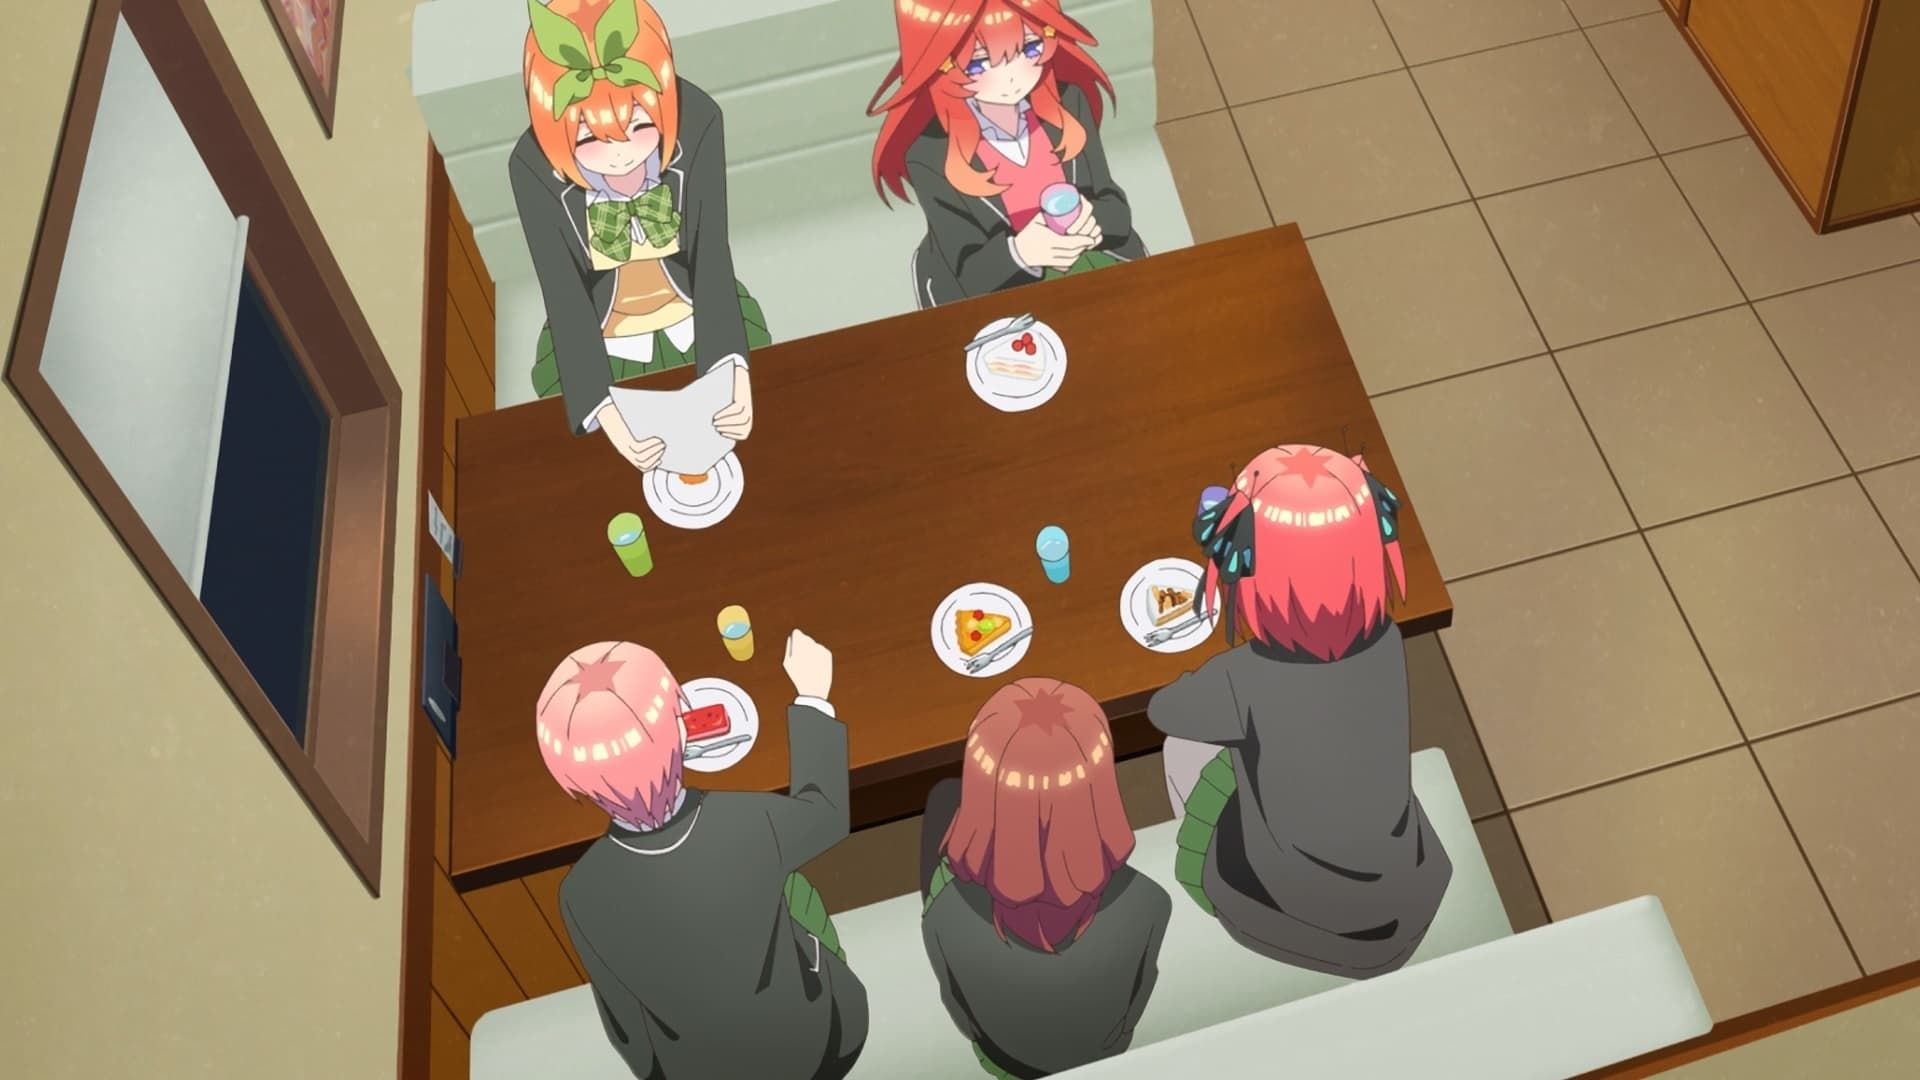 The Quintessential Quintuplets Season 2 - streaming online